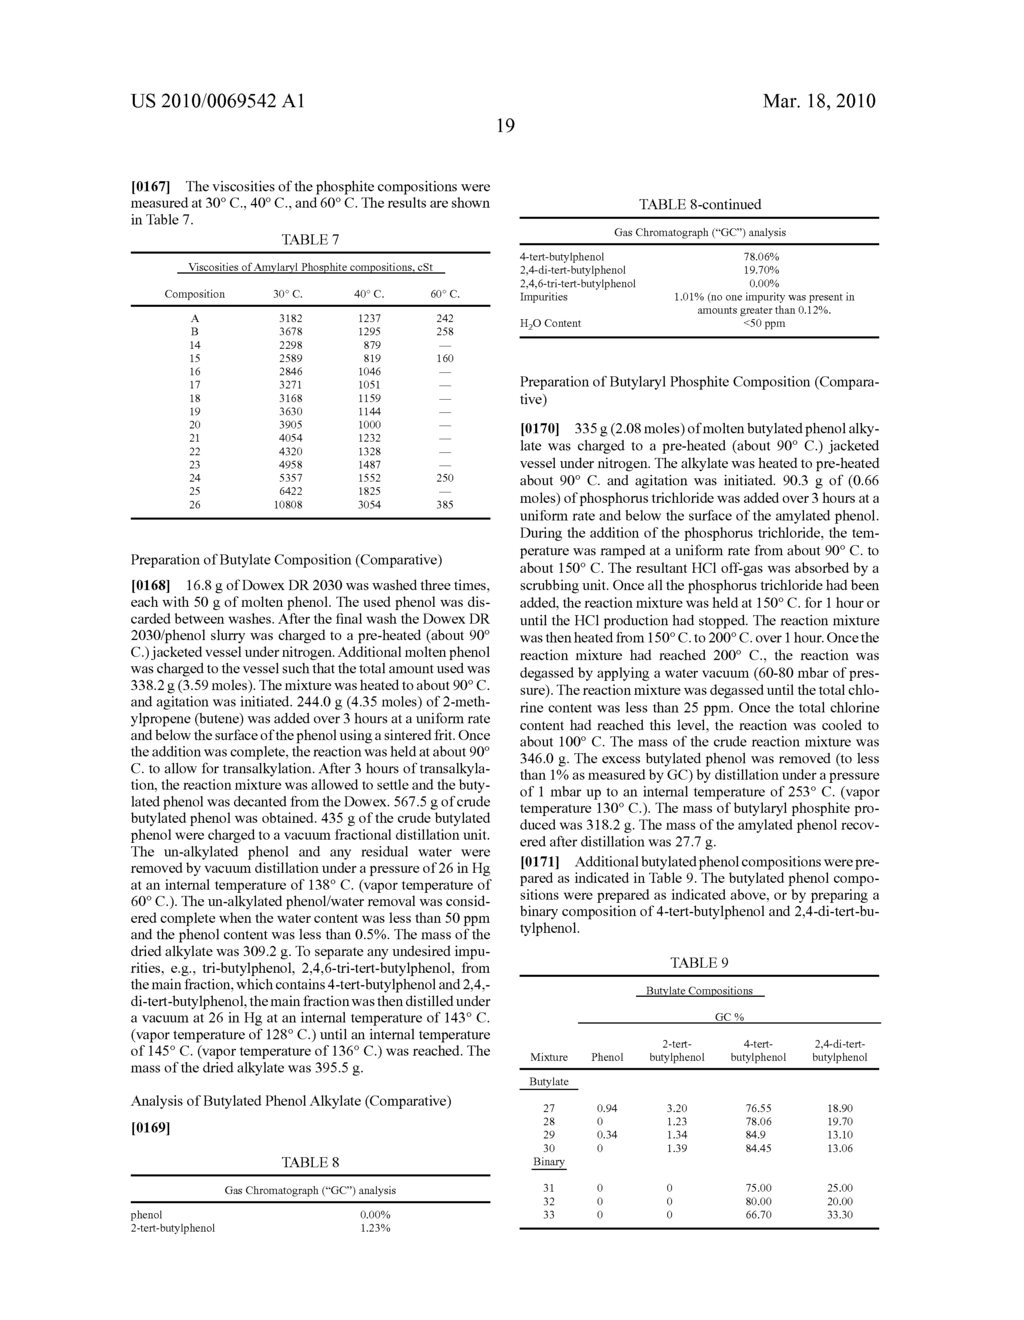 LIQUID AMYLARYL PHOSPHITE COMPOSITIONS AND ALKYLATE COMPOSITIONS FOR MANUFACTURING SAME - diagram, schematic, and image 20